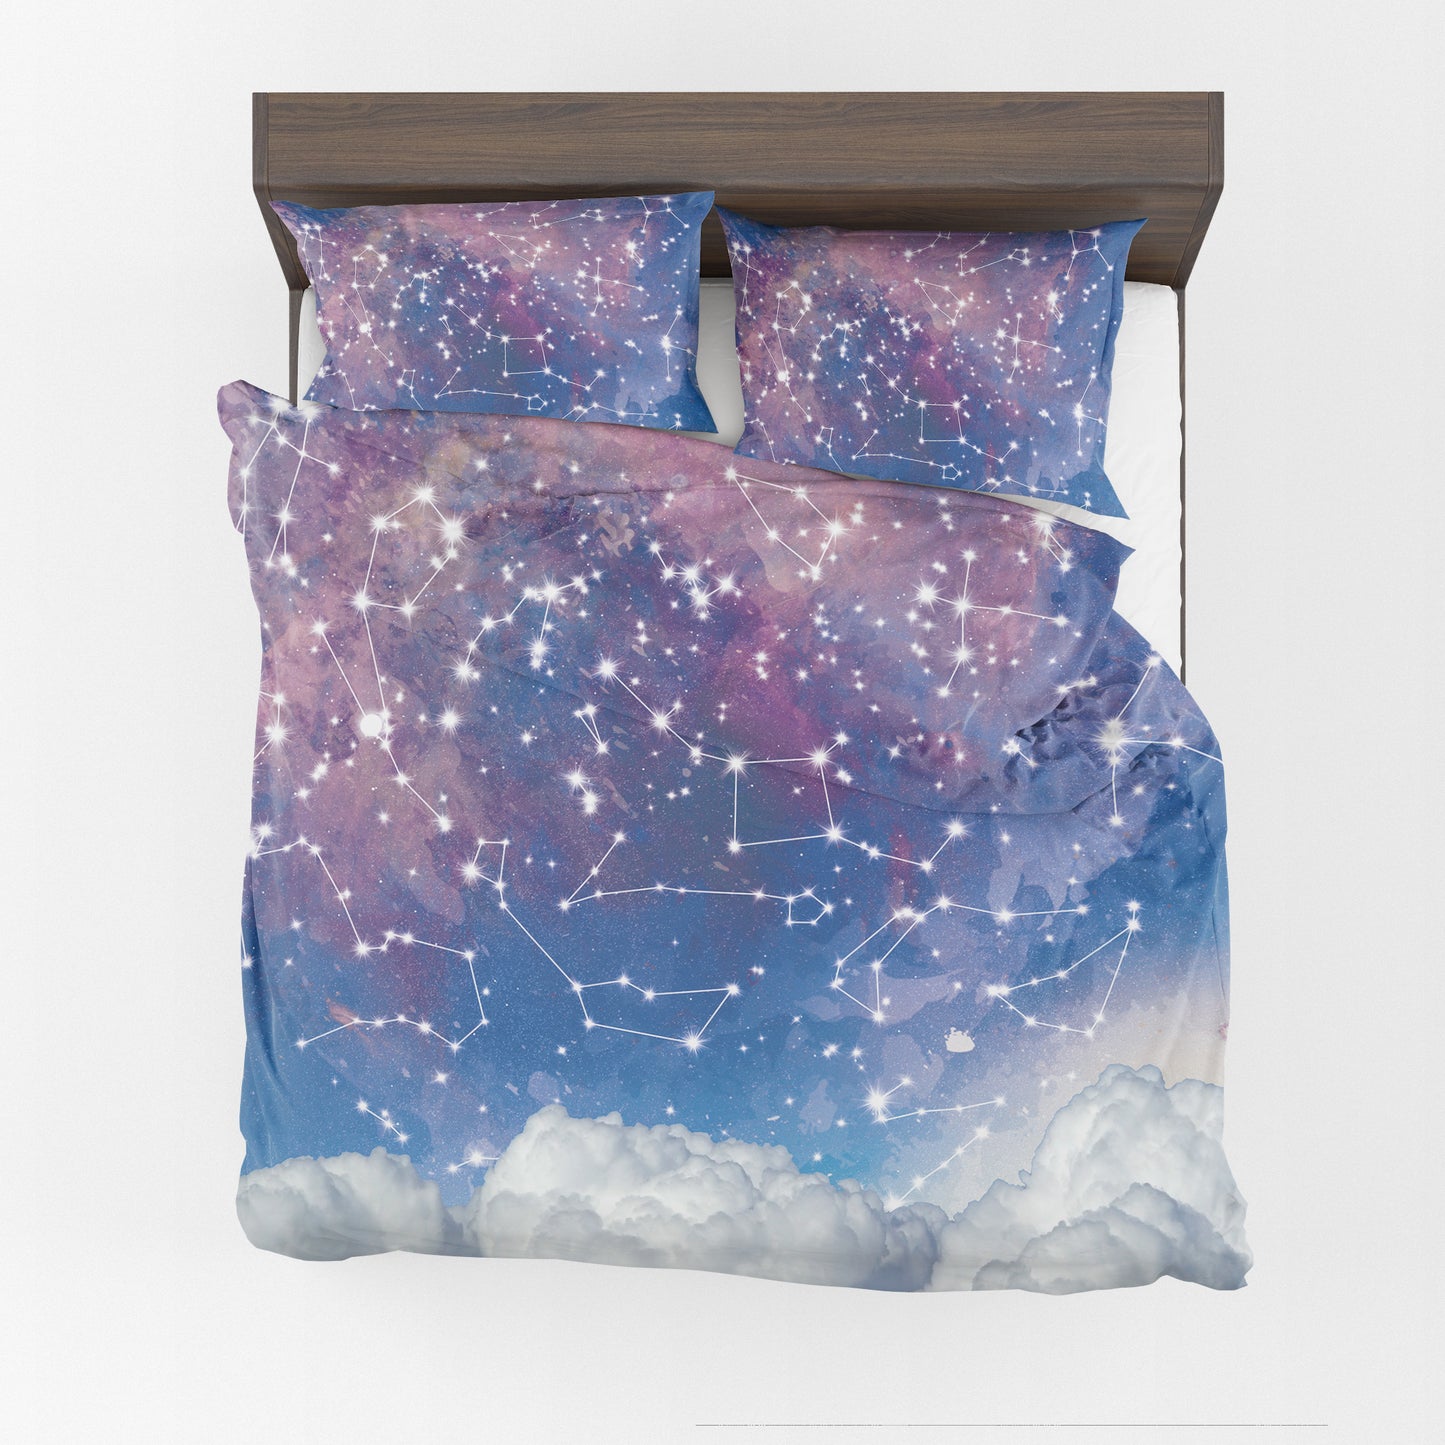 Star Constellations Duvet Cover or Comforter space bedding Twin Queen king galaxy starmap